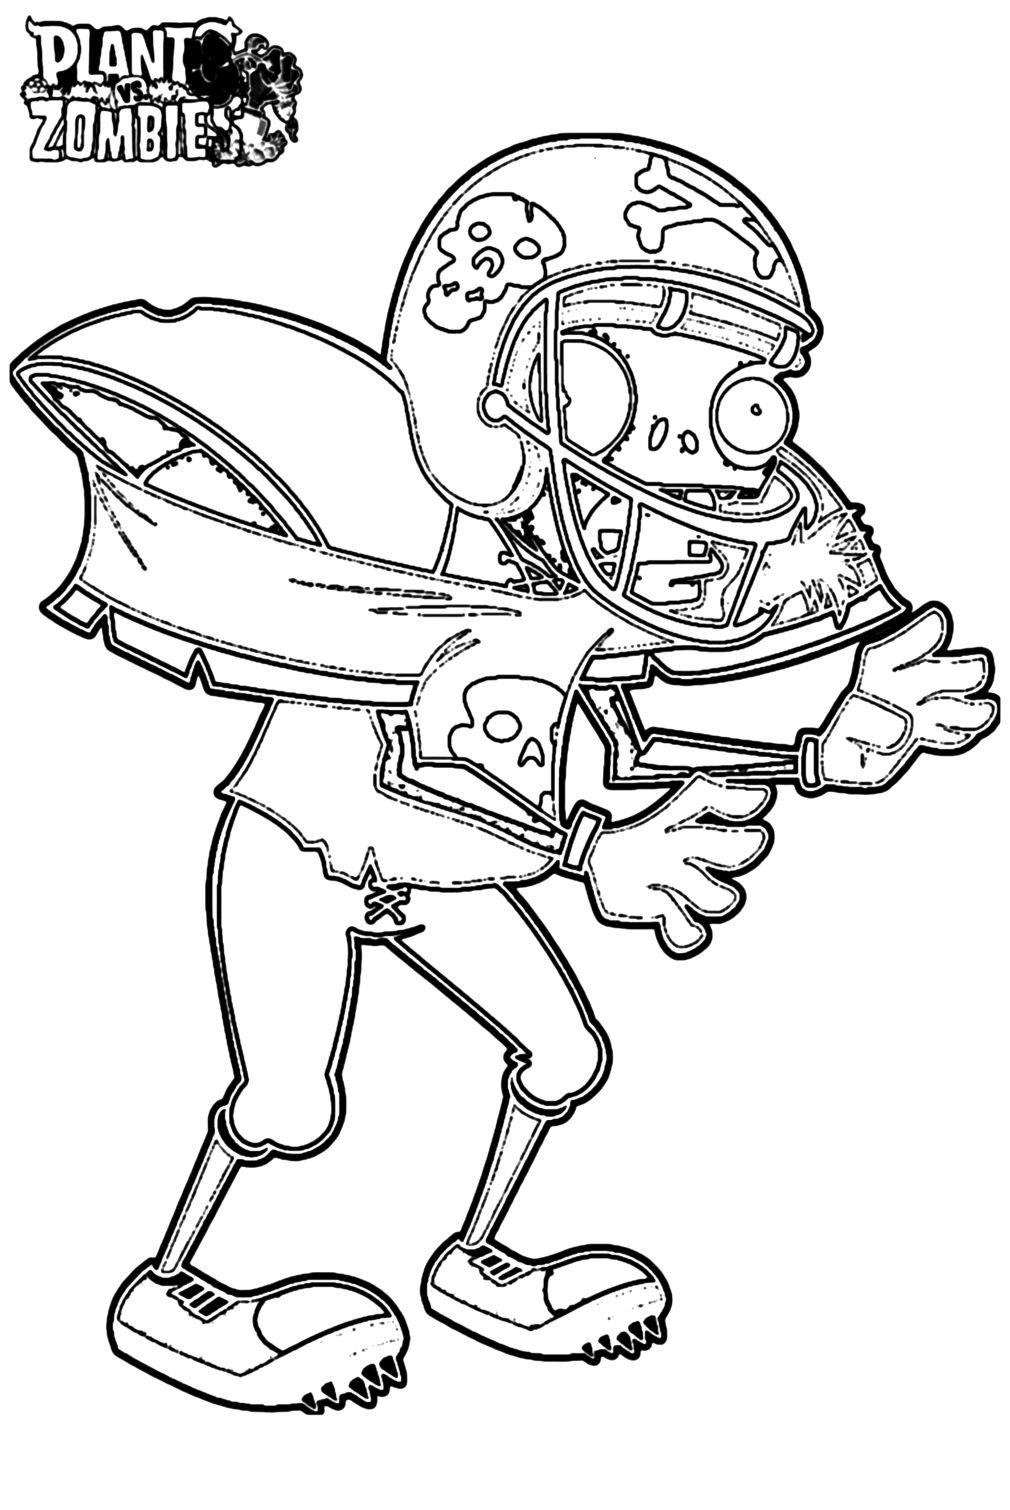 Football Zombie Coloring Pages